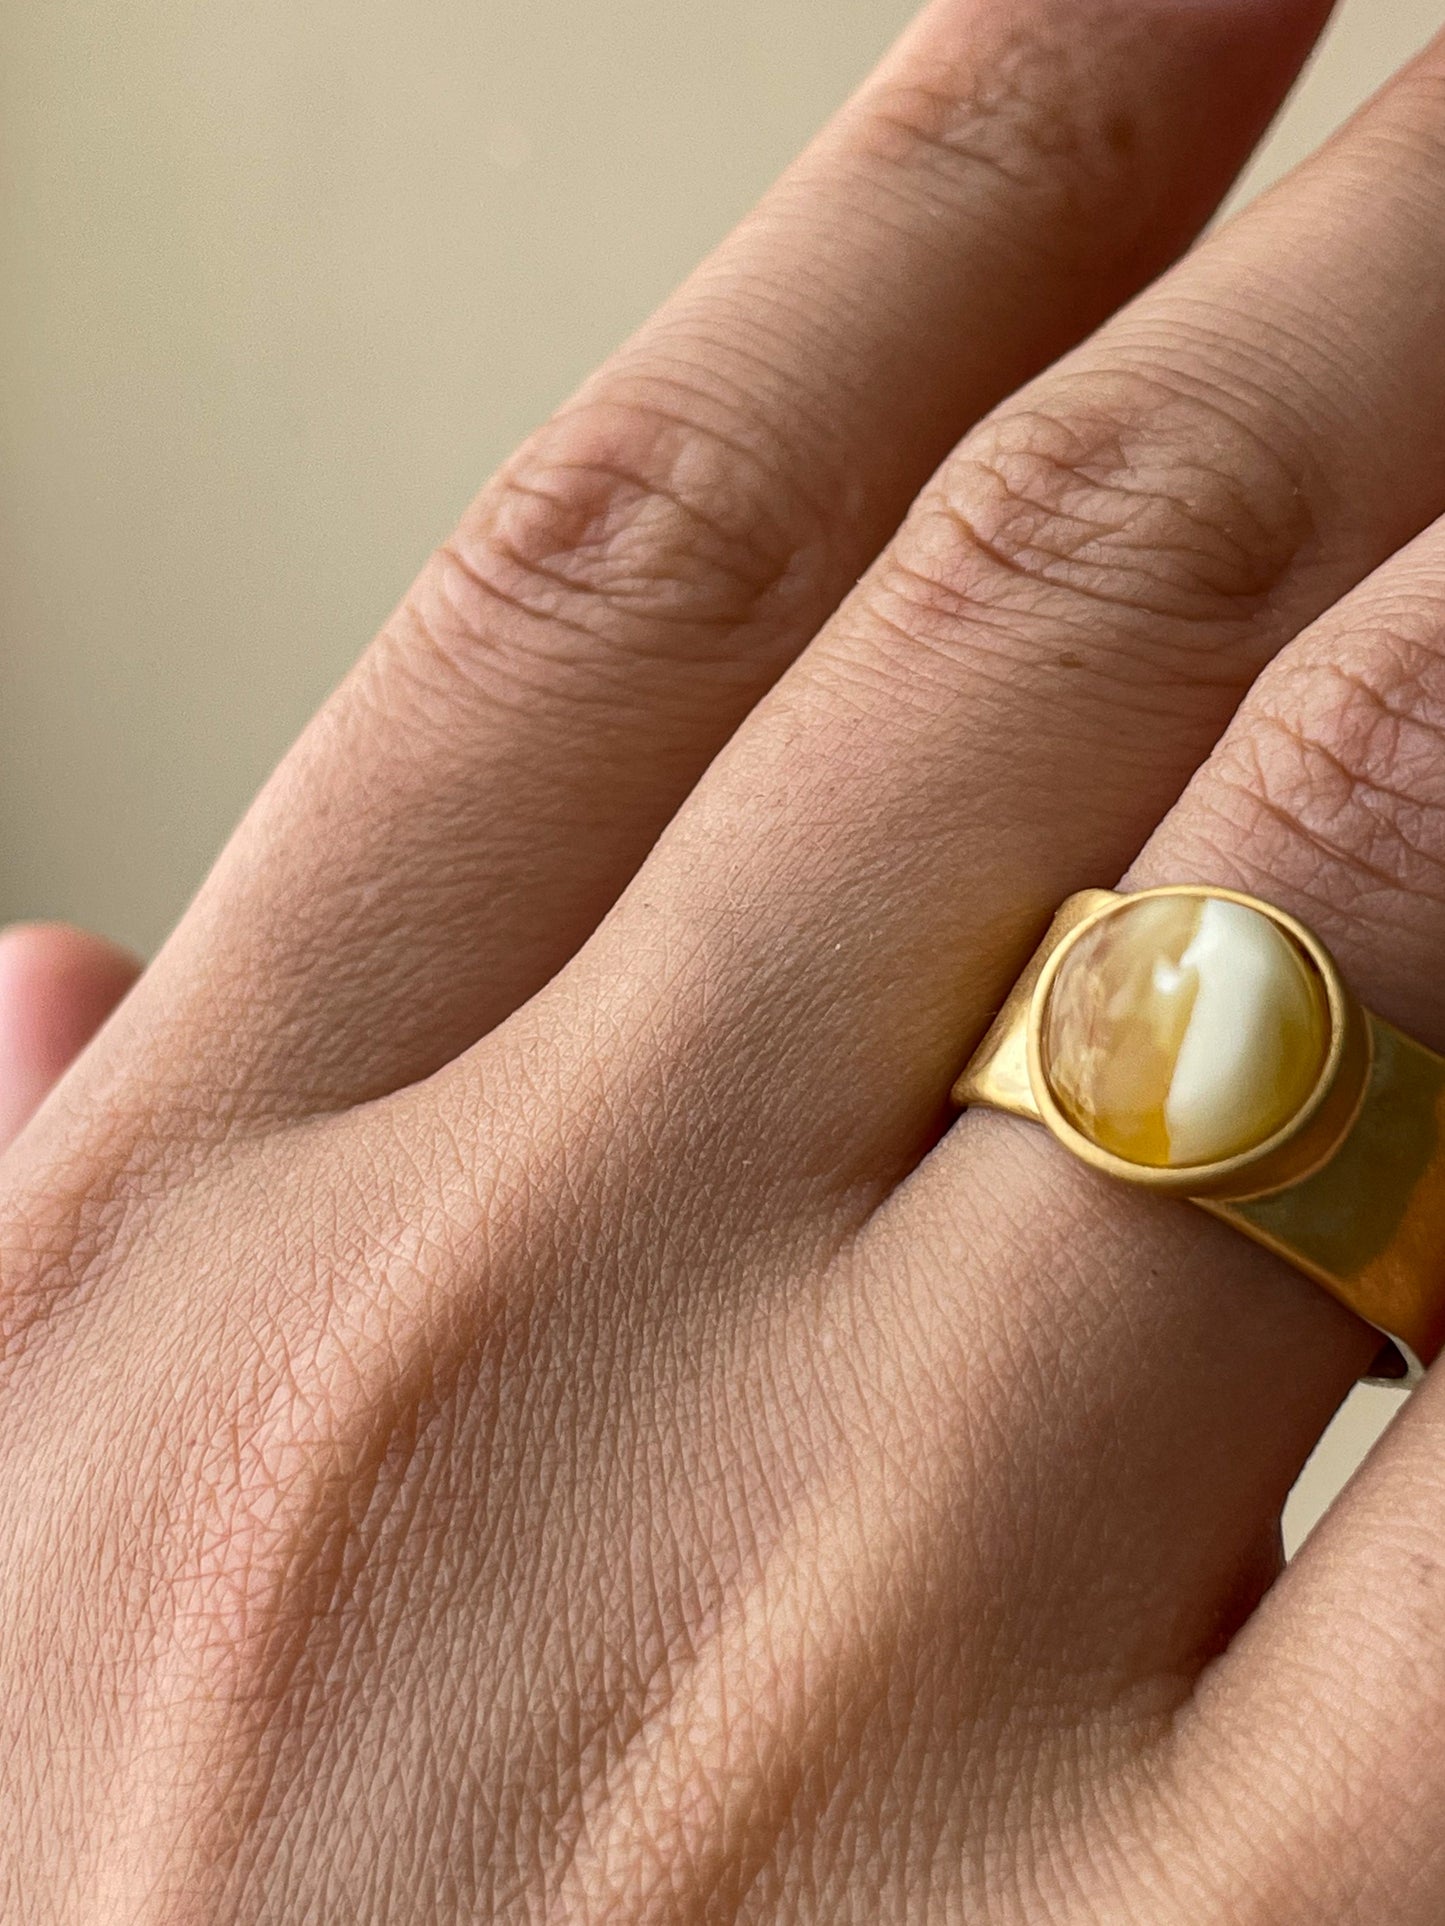 Landscape amber ring - Gold plated Silver - Wide ring collection